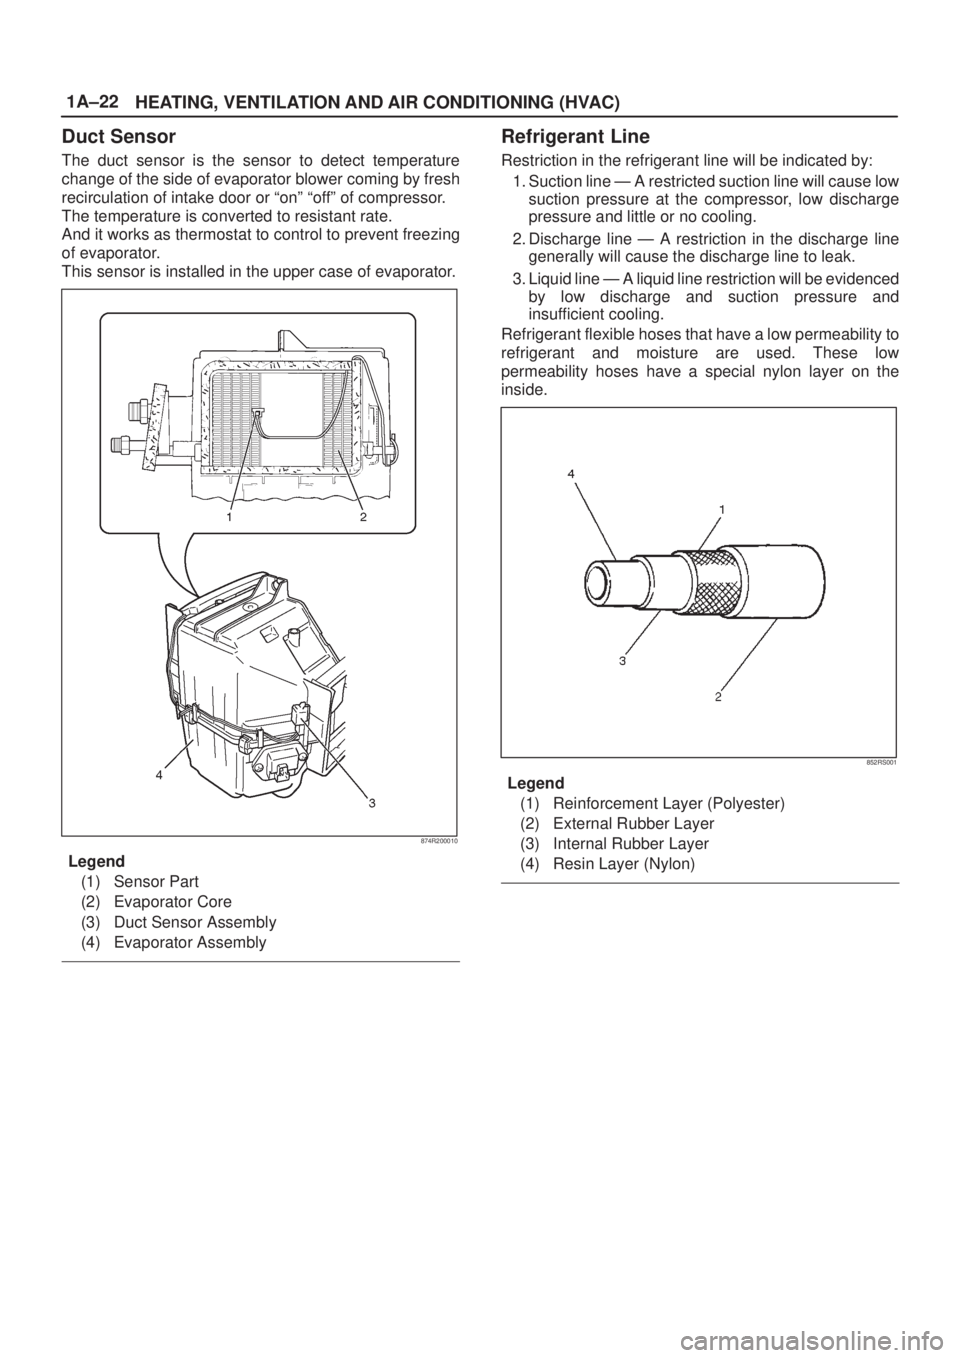 ISUZU AXIOM 2002  Service Repair Manual 1A±22
HEATING, VENTILATION AND AIR CONDITIONING (HVAC)
Duct Sensor
The duct sensor is the sensor to detect temperature
change of the side of evaporator blower coming by fresh
recirculation of intake 